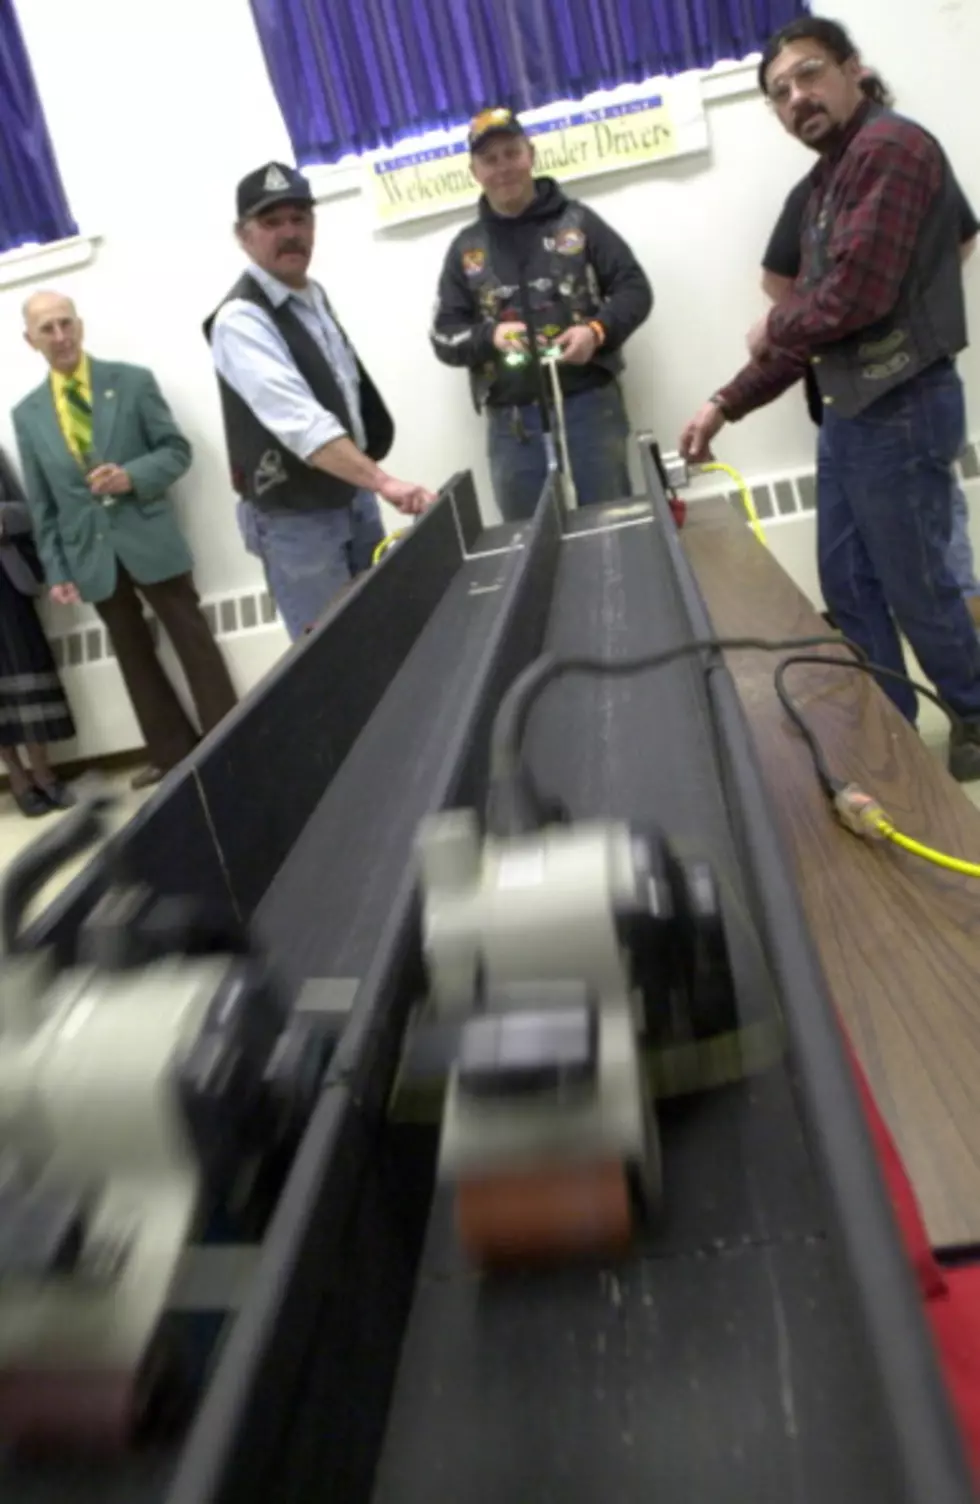 6th Annual Belt Sander Races Coming To Capital Lumber